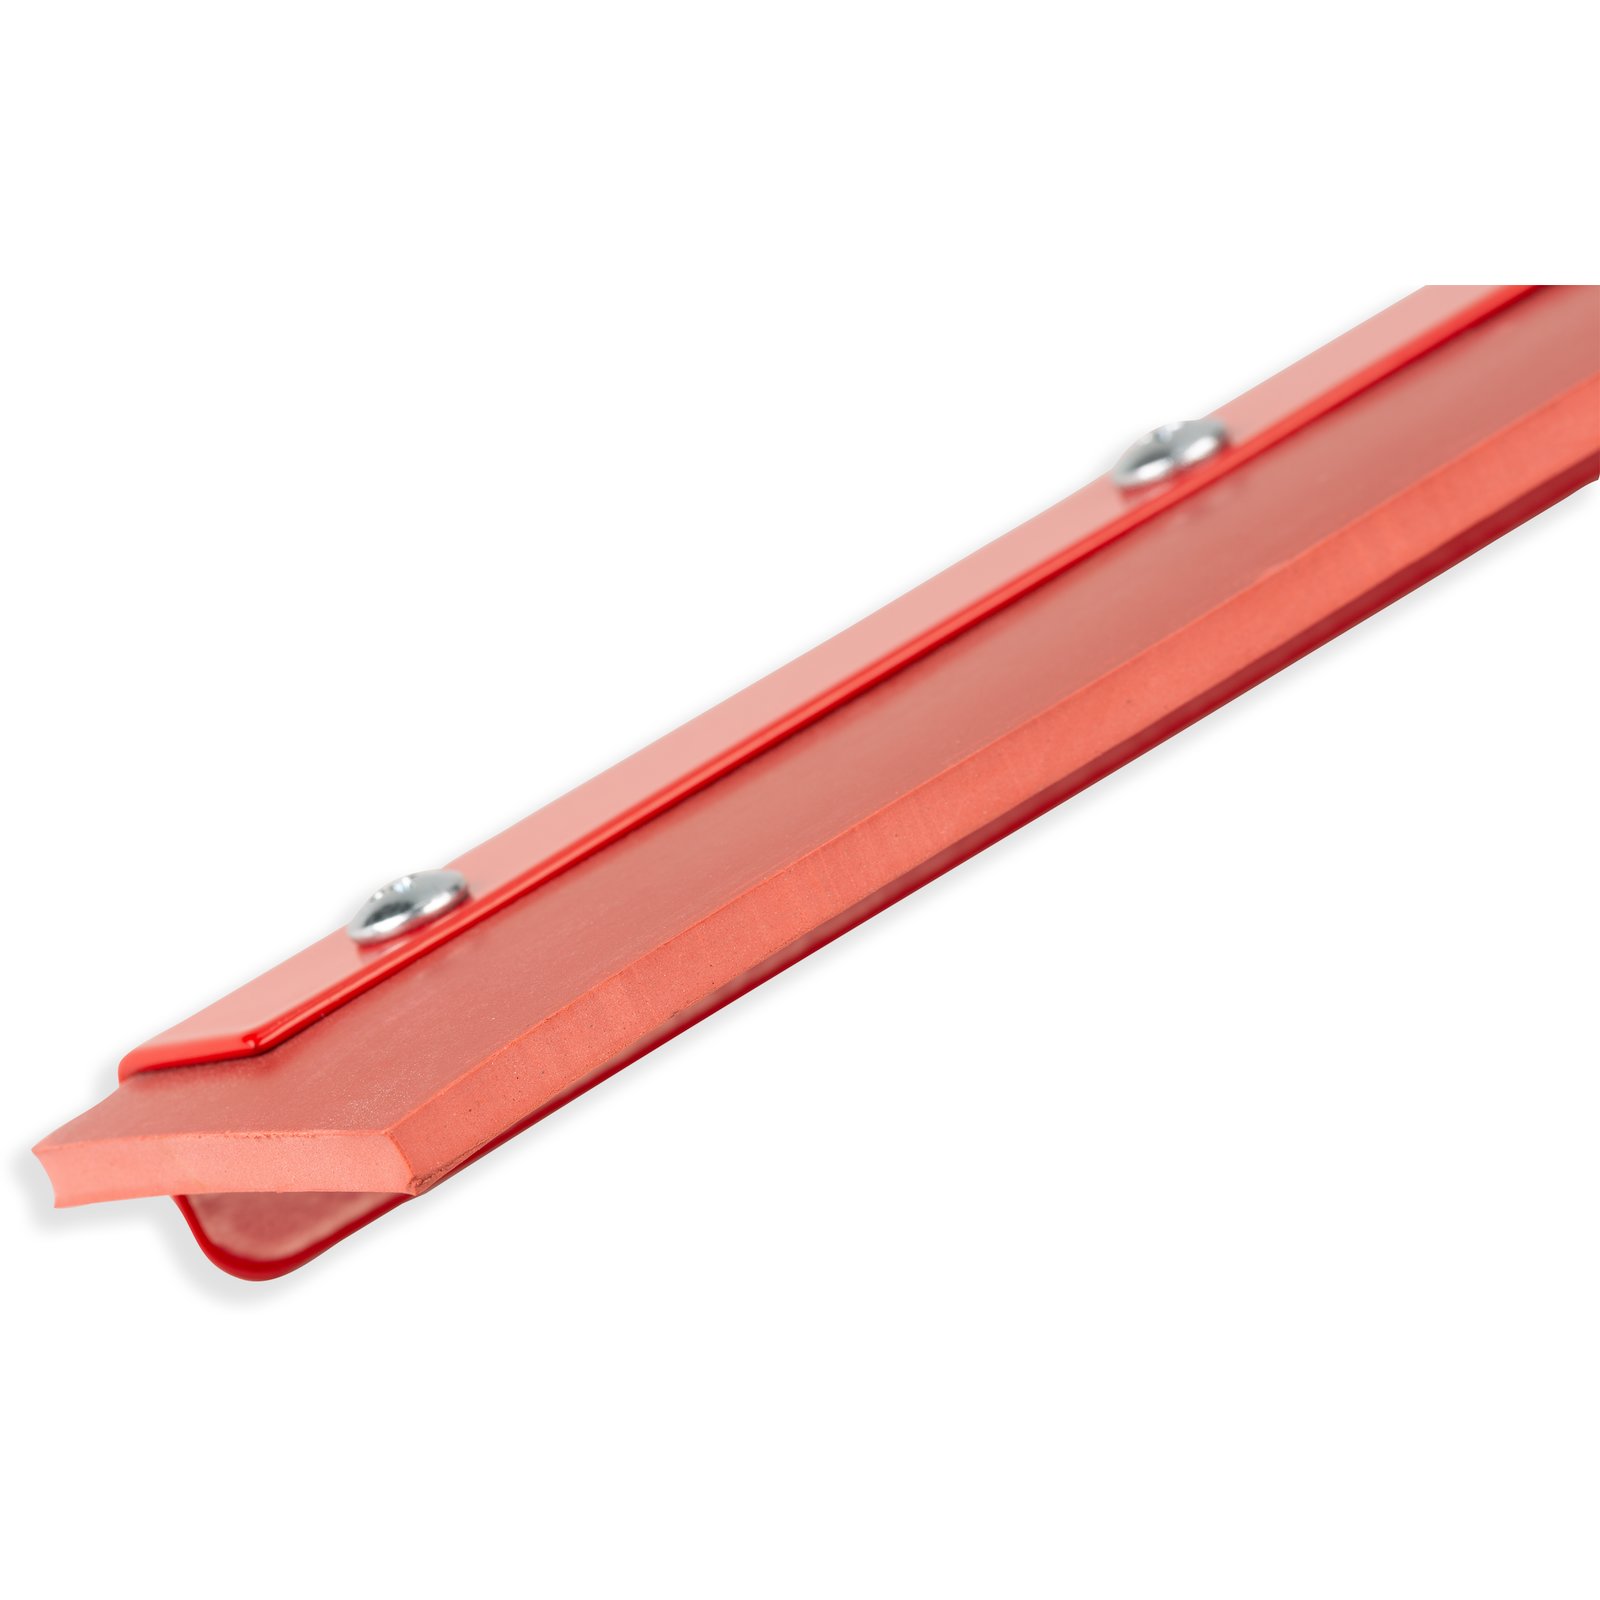 Colored Floor Squeegee - Rubber, 24, Red H-6490R - Uline